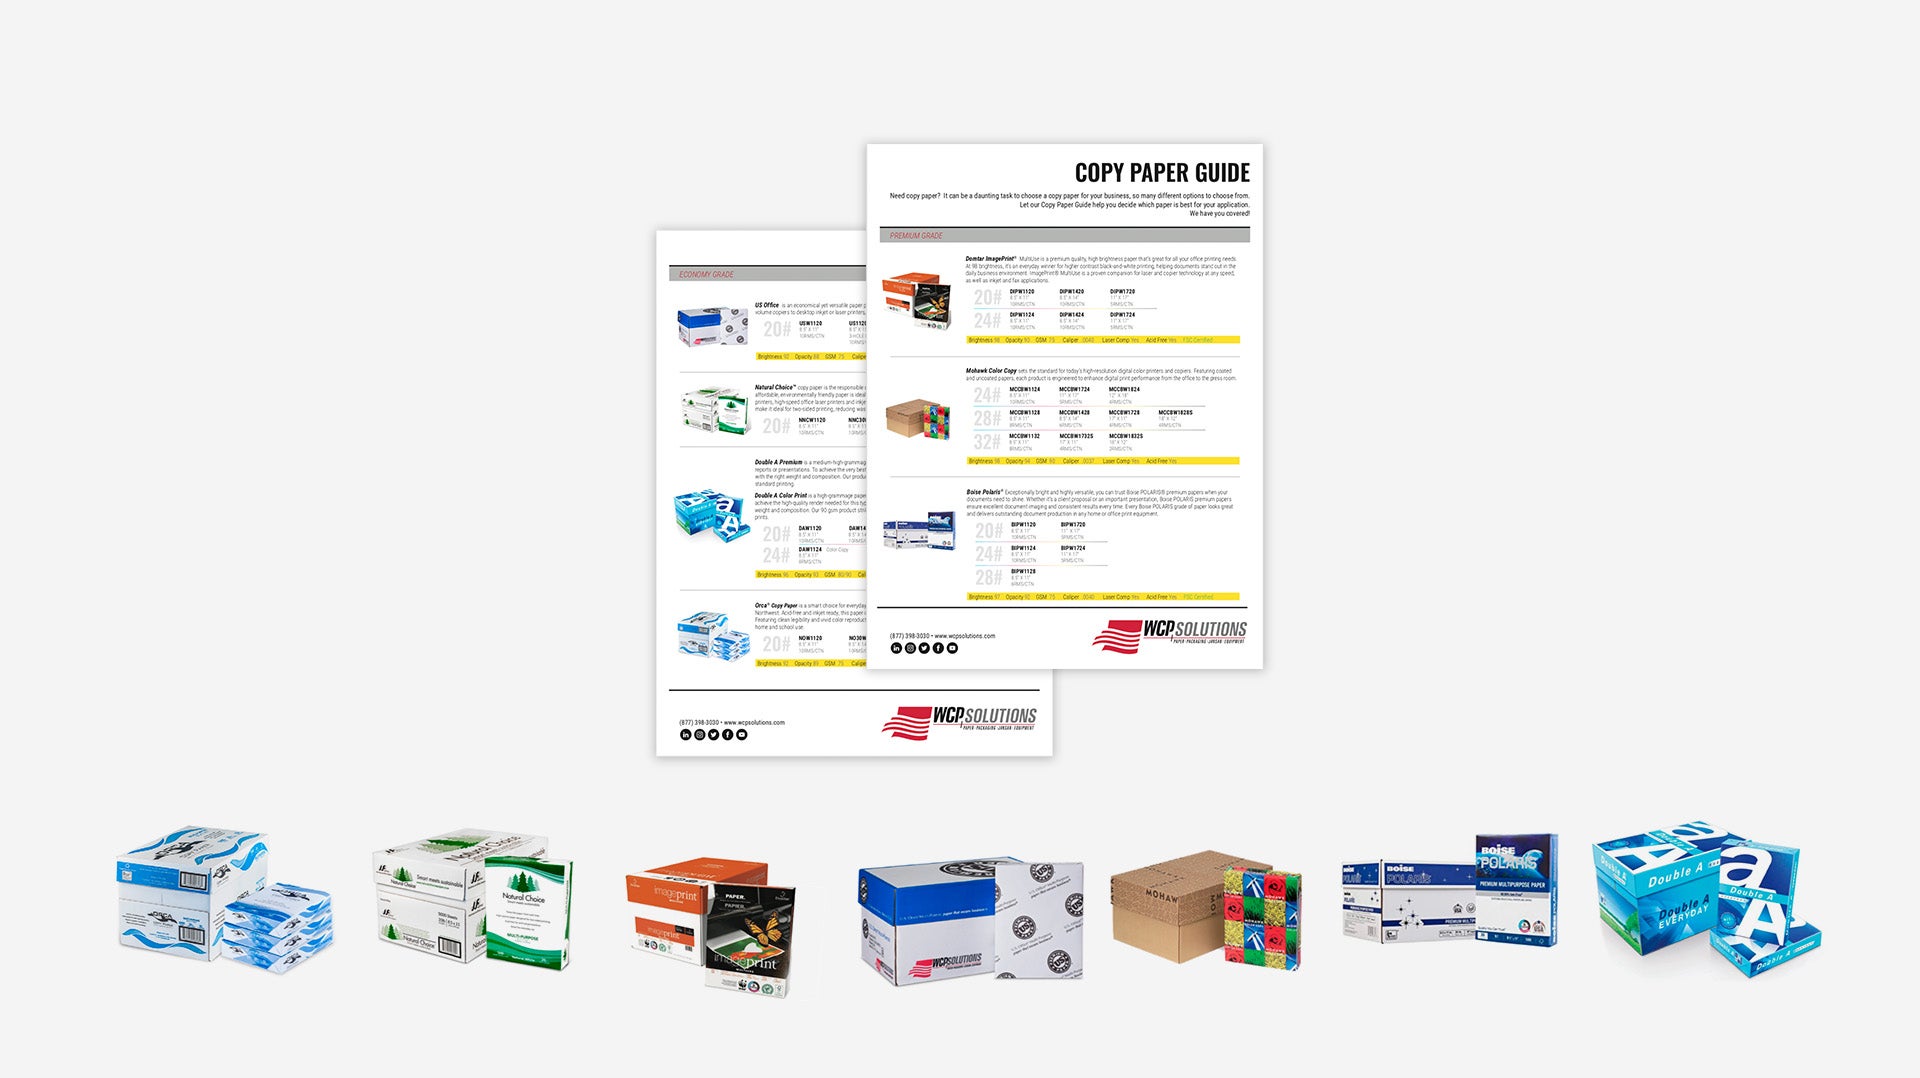 Download the new copy paper guide from WCP Solutions